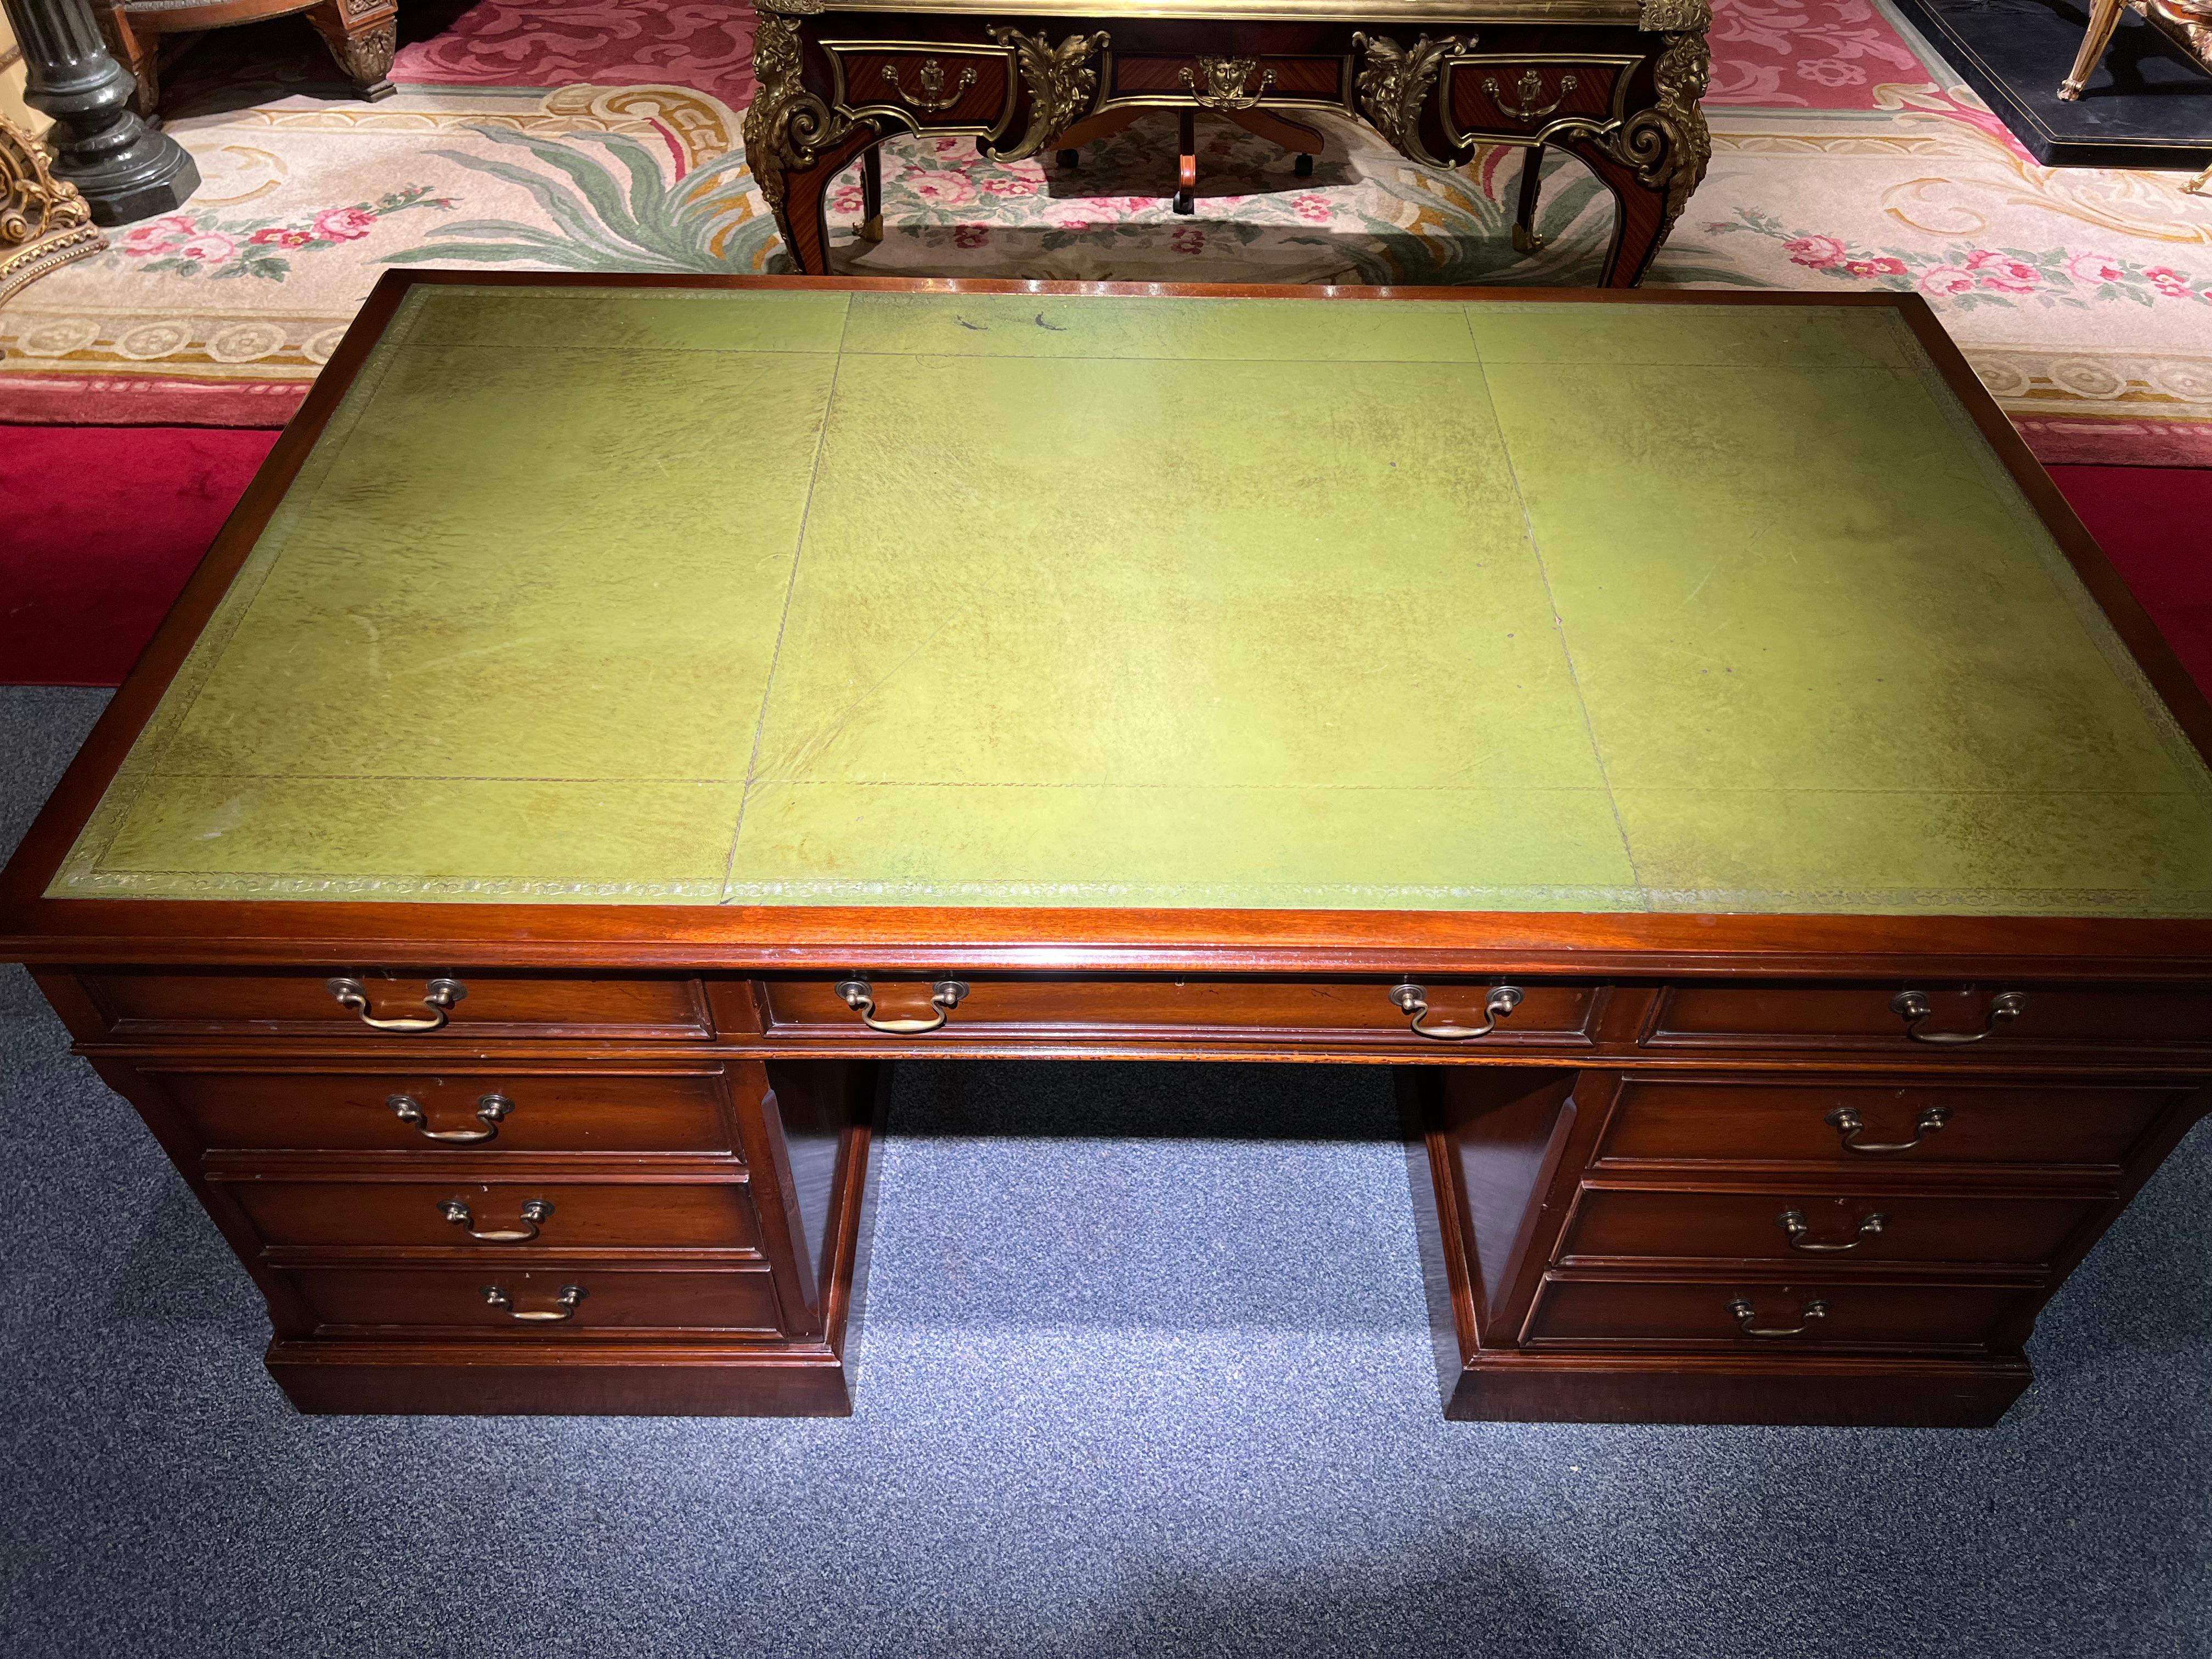 Solid wood and mahogany stained body. Leather-covered worktop. Freely adjustable in the room. Desk consists of three parts (2 containers + worktop). The desk is an absolute classic and fits in every household / office. He also offers a lot of